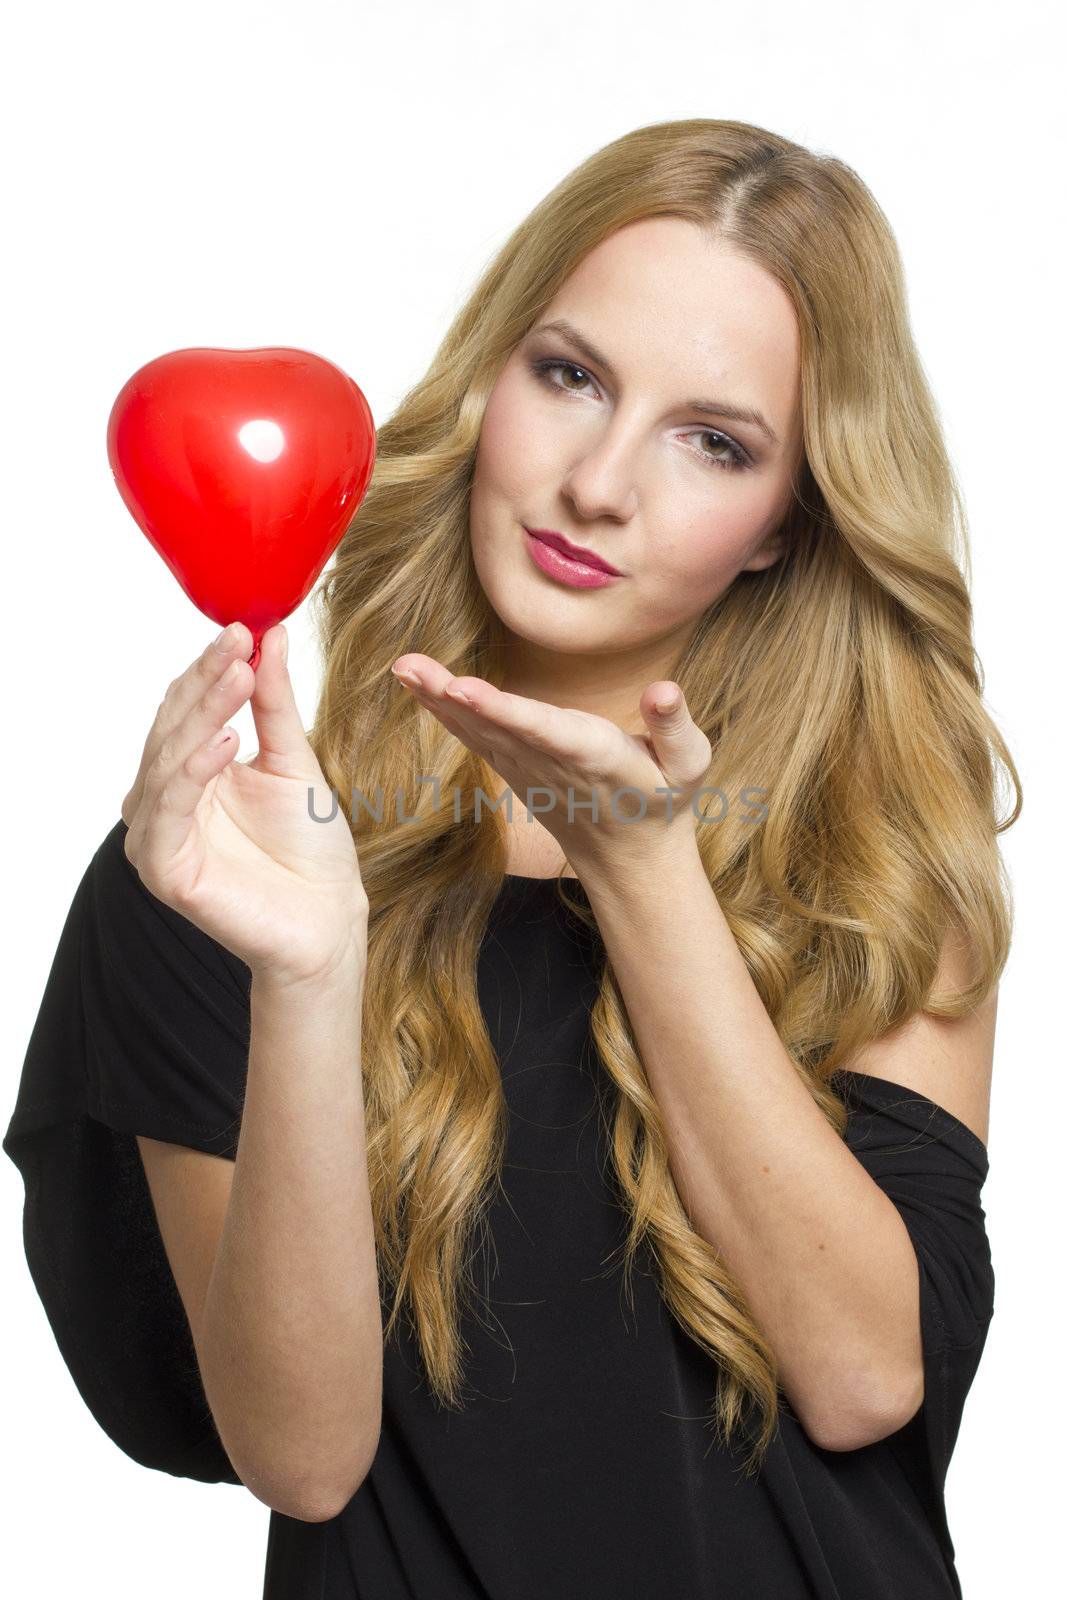 Young woman holding red heart in valentine's day, on white background